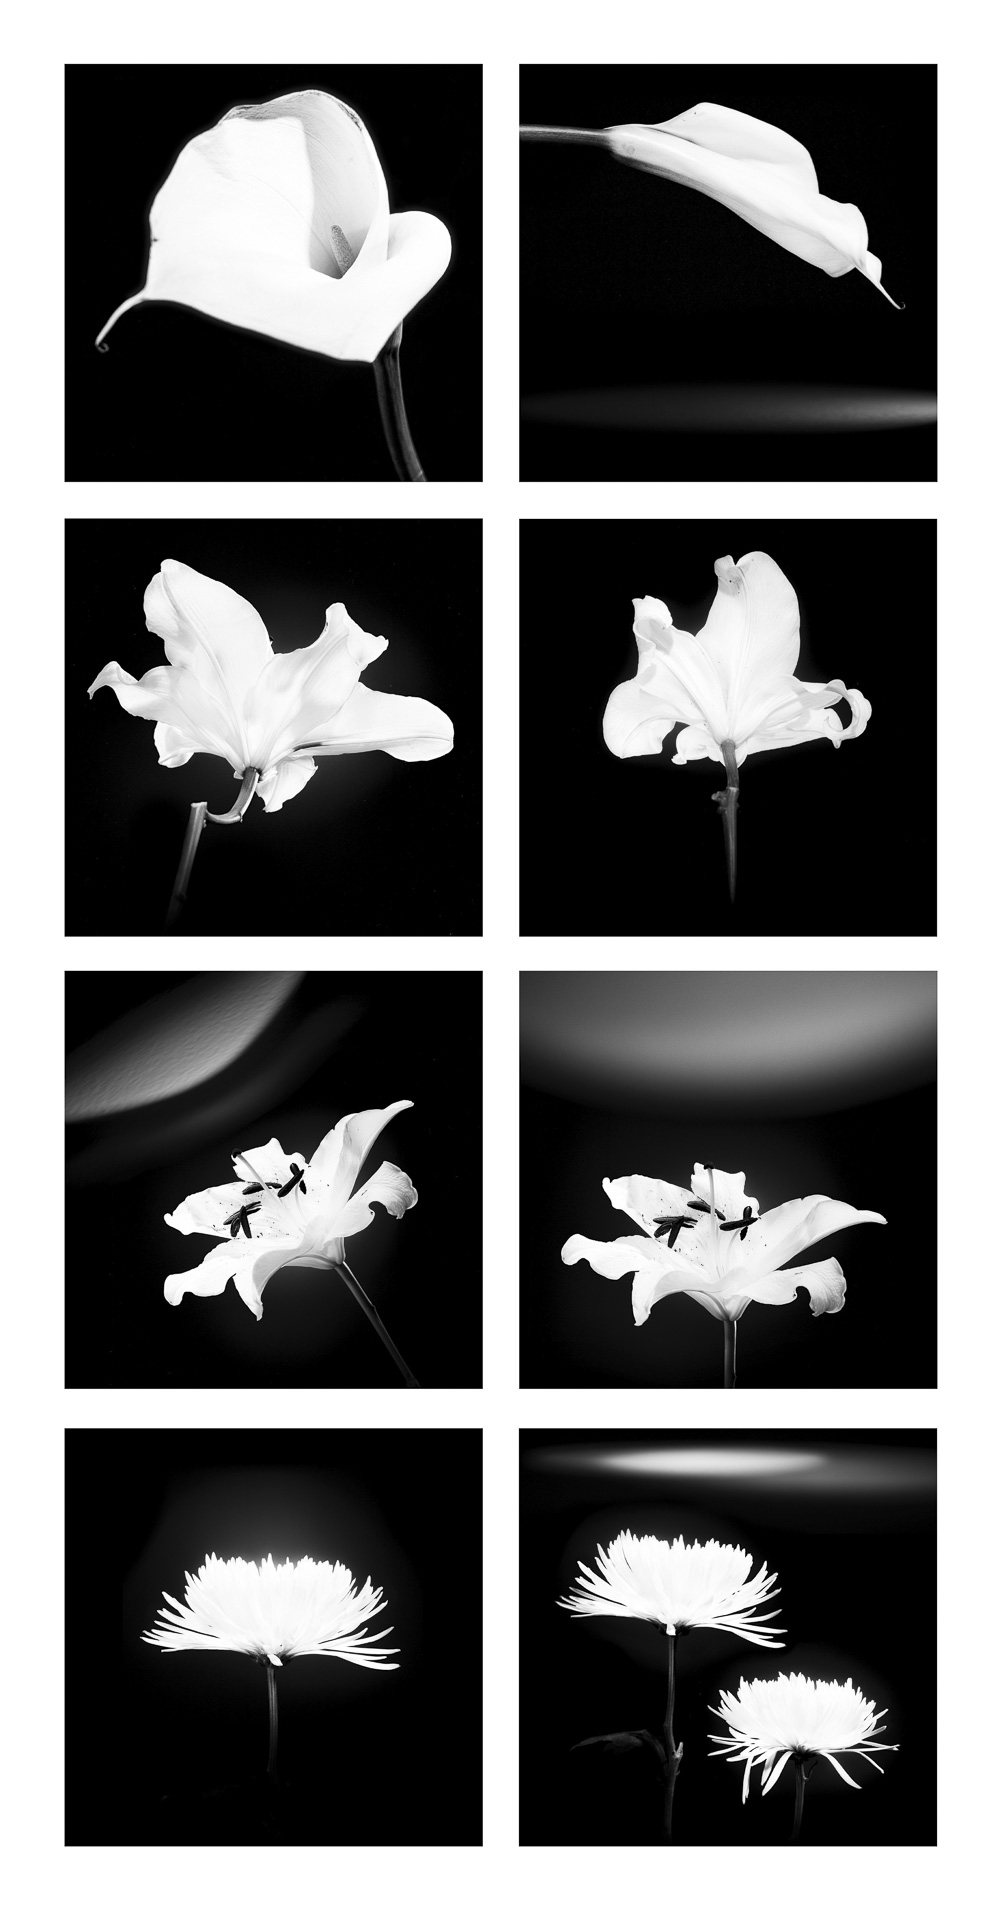 A grid of images showing flowers